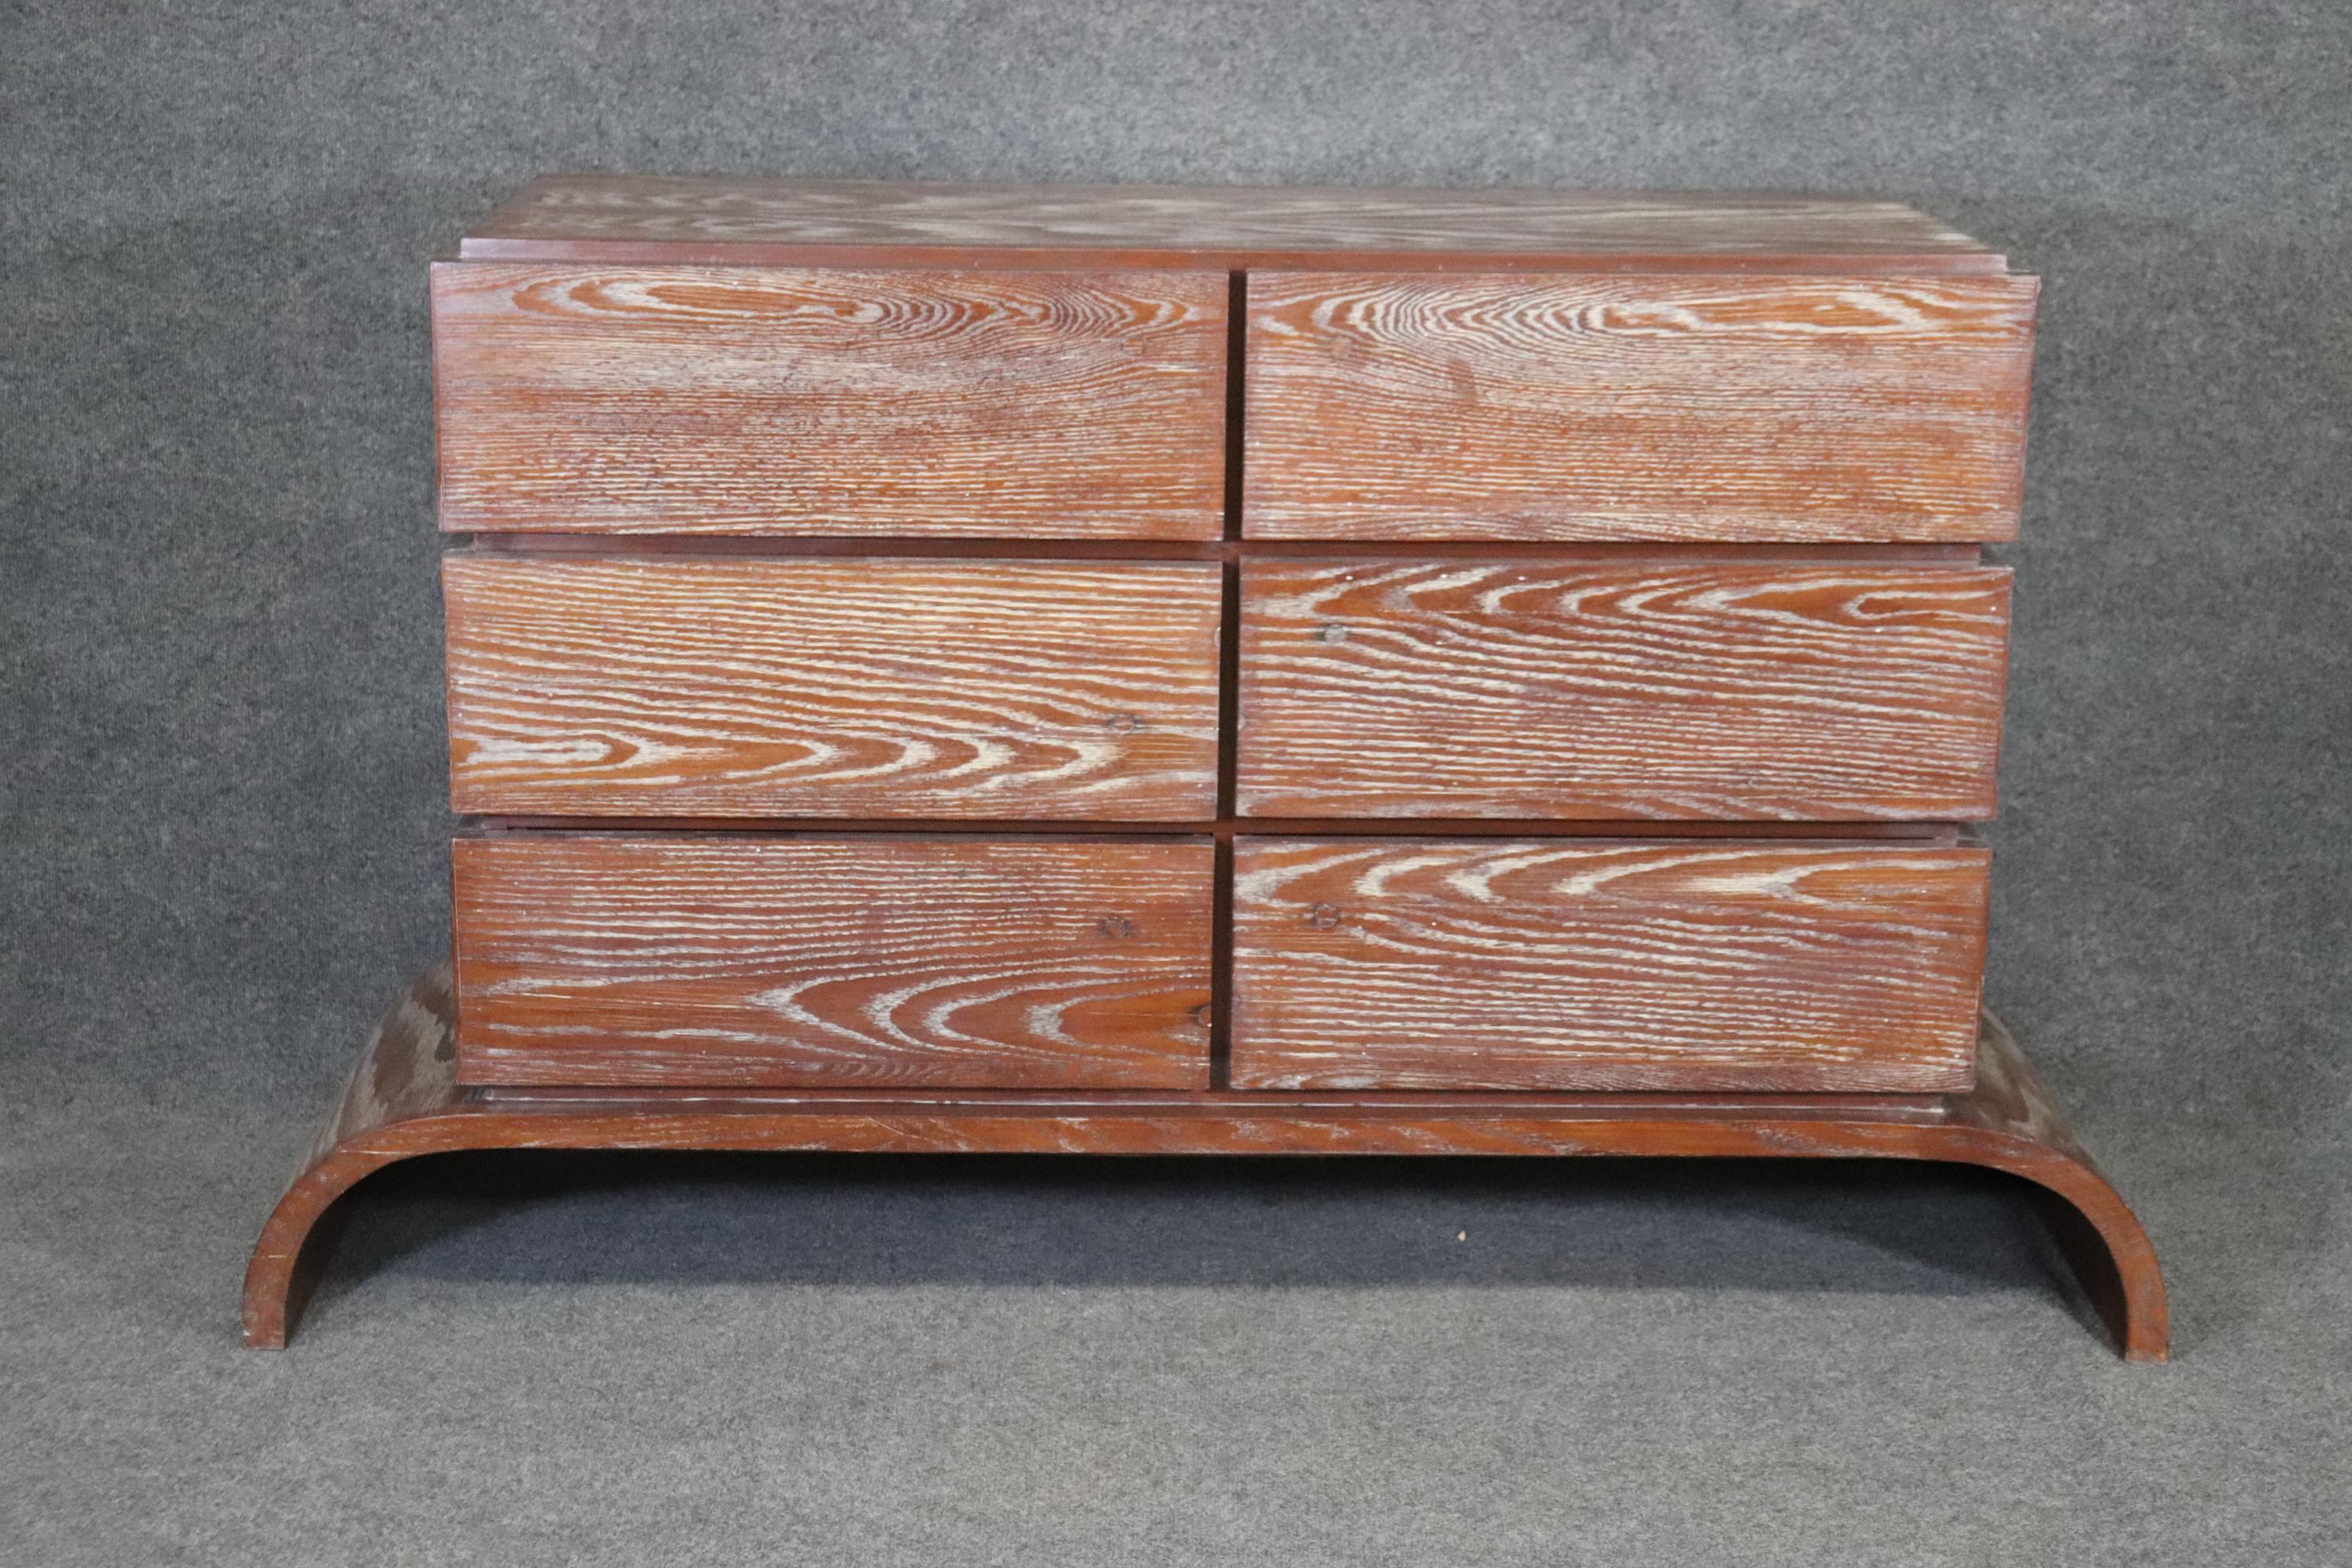 This is a gorgeous cerused oak dresser or commode that is designed in the style of Gio Ponti. The commode is in good vintage condition and has minor signs of age and wear. The wood quality is absolutely beautiful and the piece is solid and heavy.